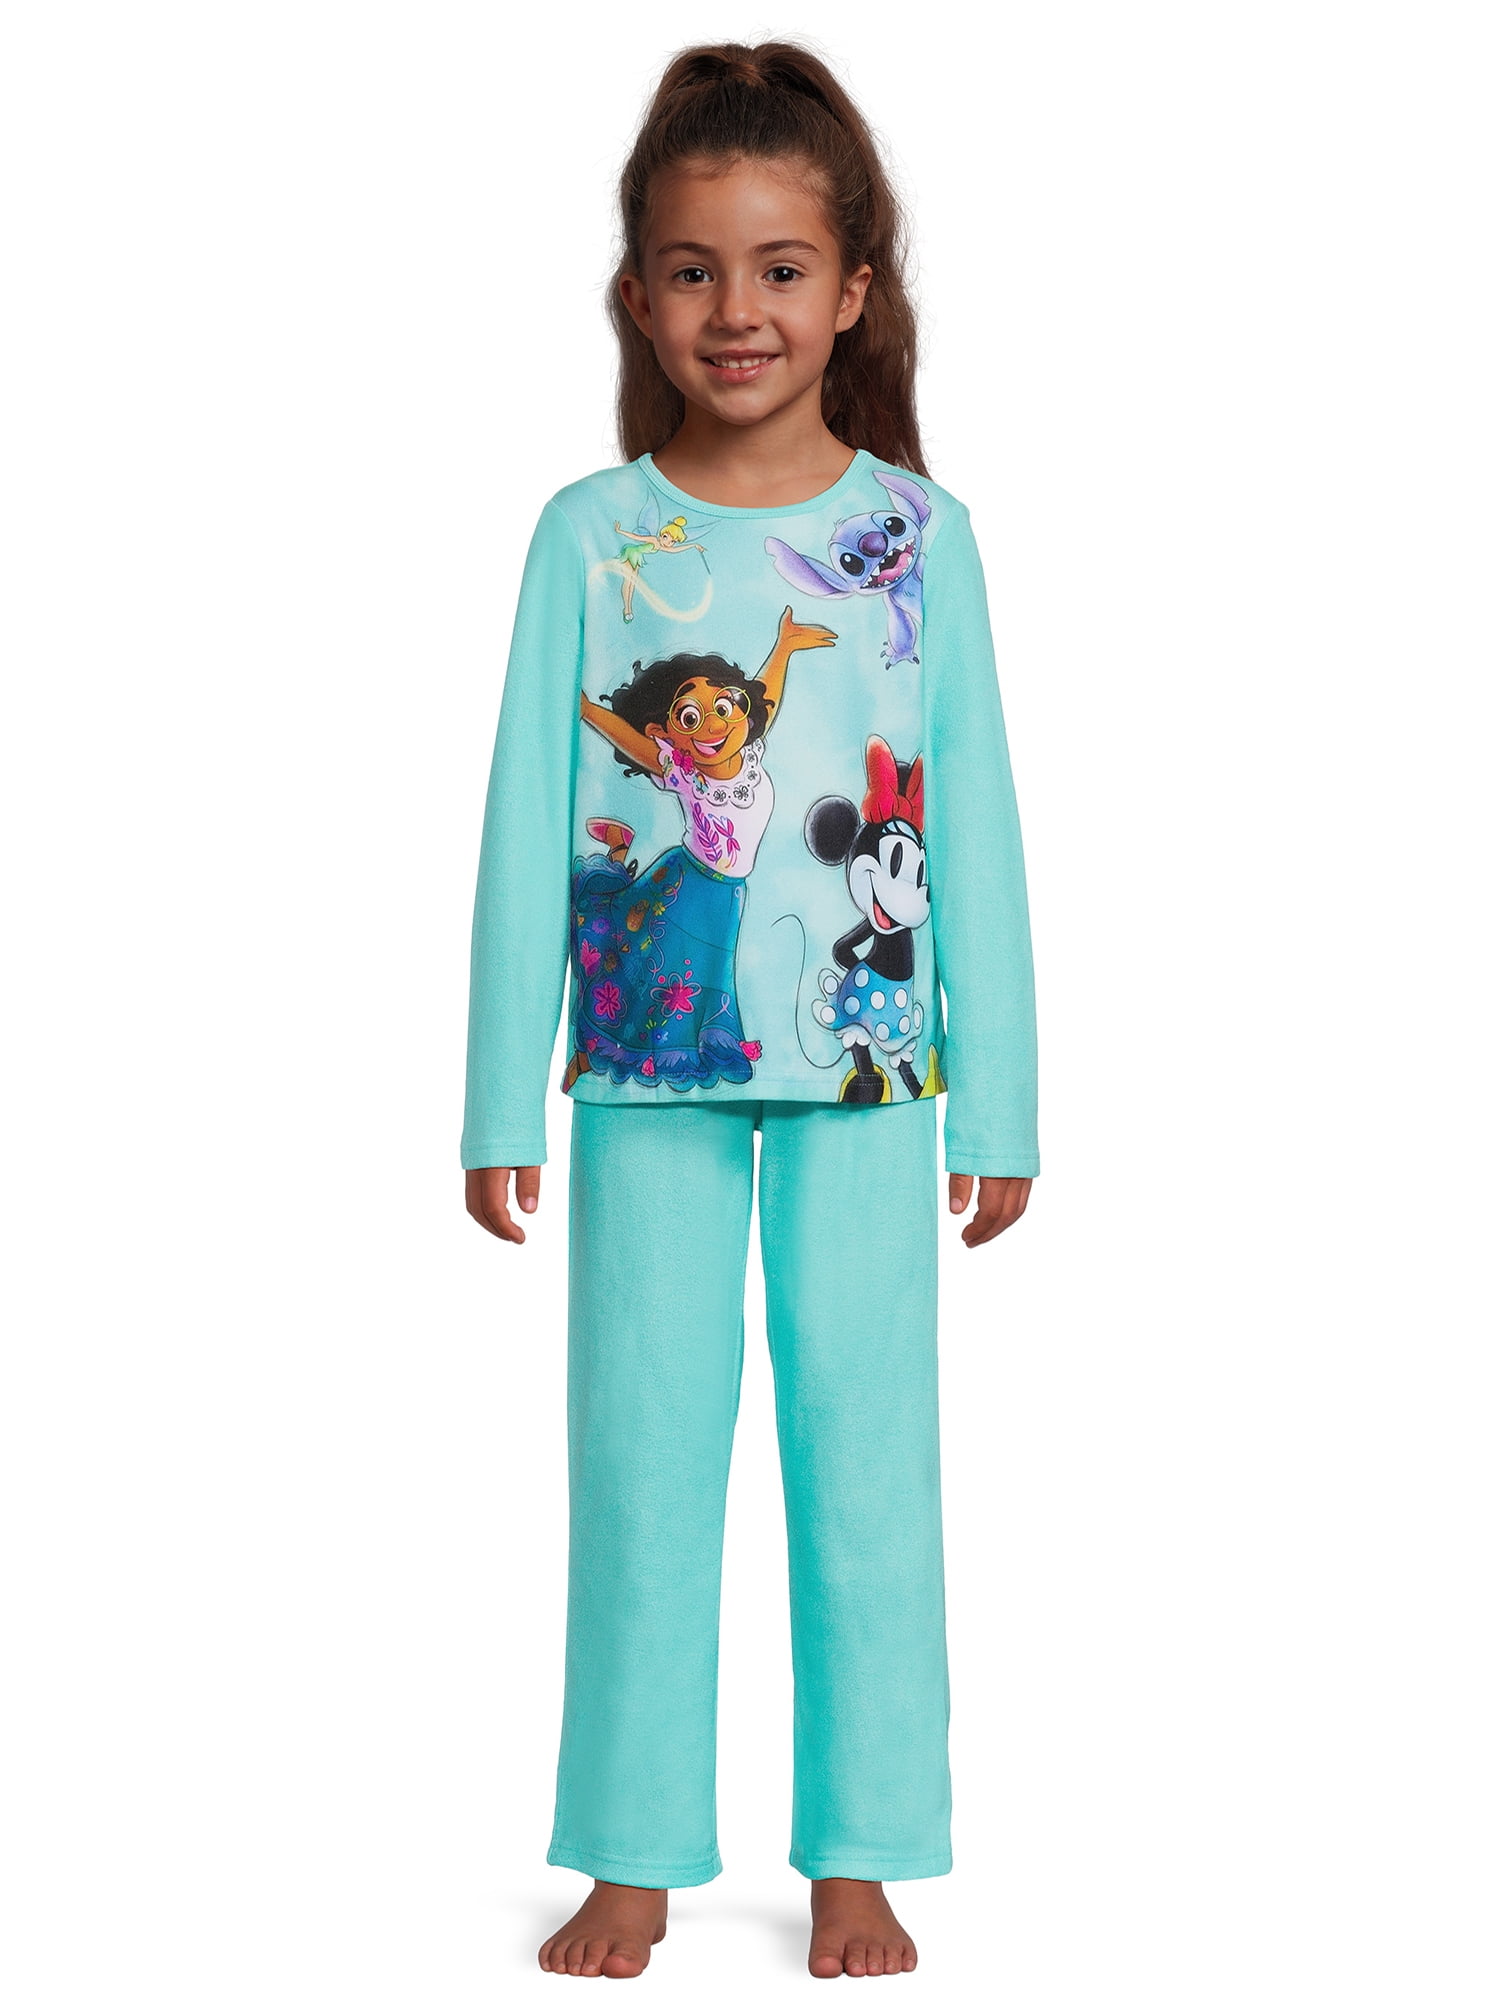 Girls Licensed Character Long Sleeve Top and Pants Sleep Set, 2-Piece,  Sizes 4-12 